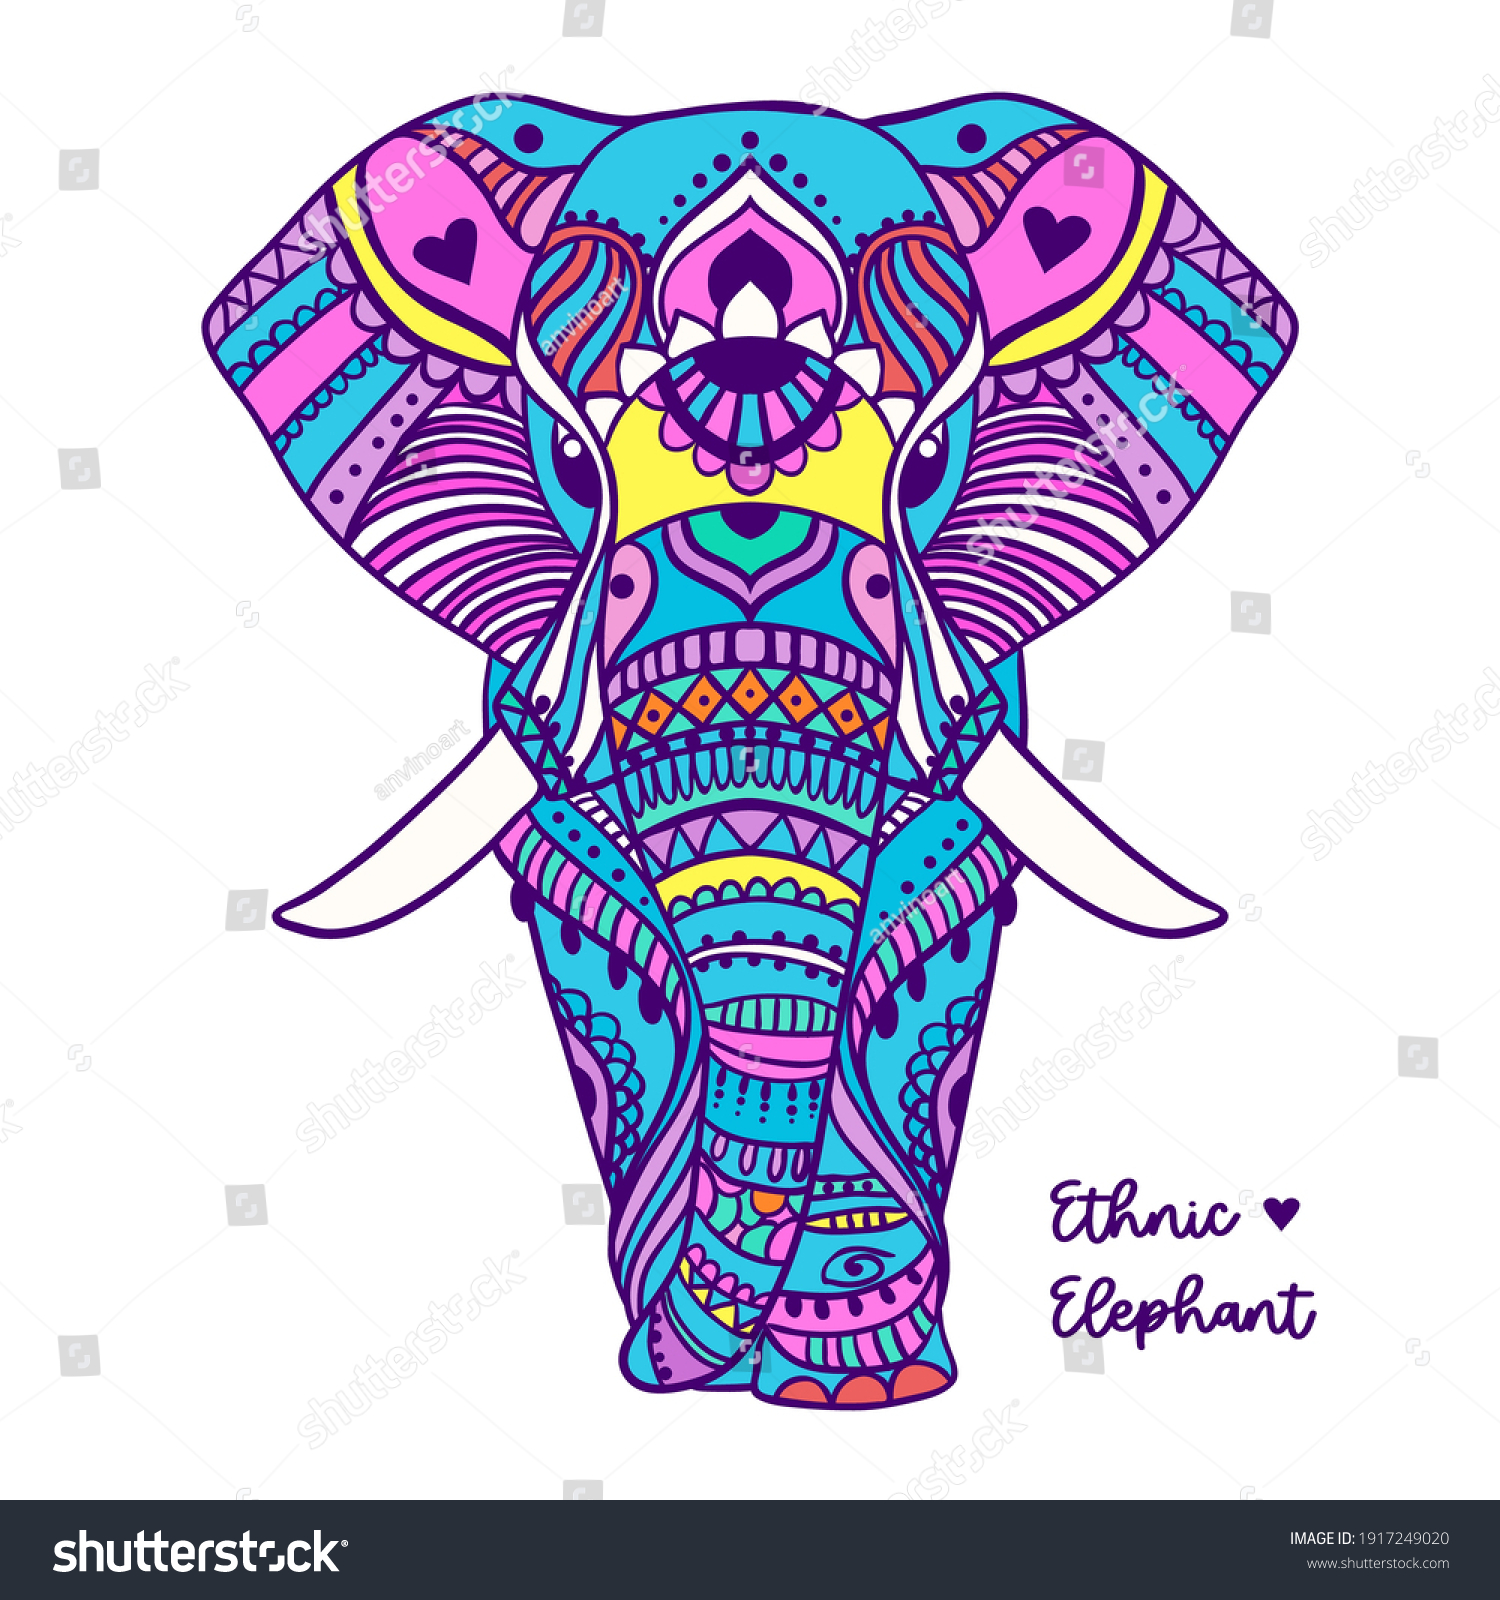 SVG of Boho elephant. Vector illustration. Floral design, hand drawn map with Elephant ornamental.Tribal, India, hippie, Bohemian styles. svg